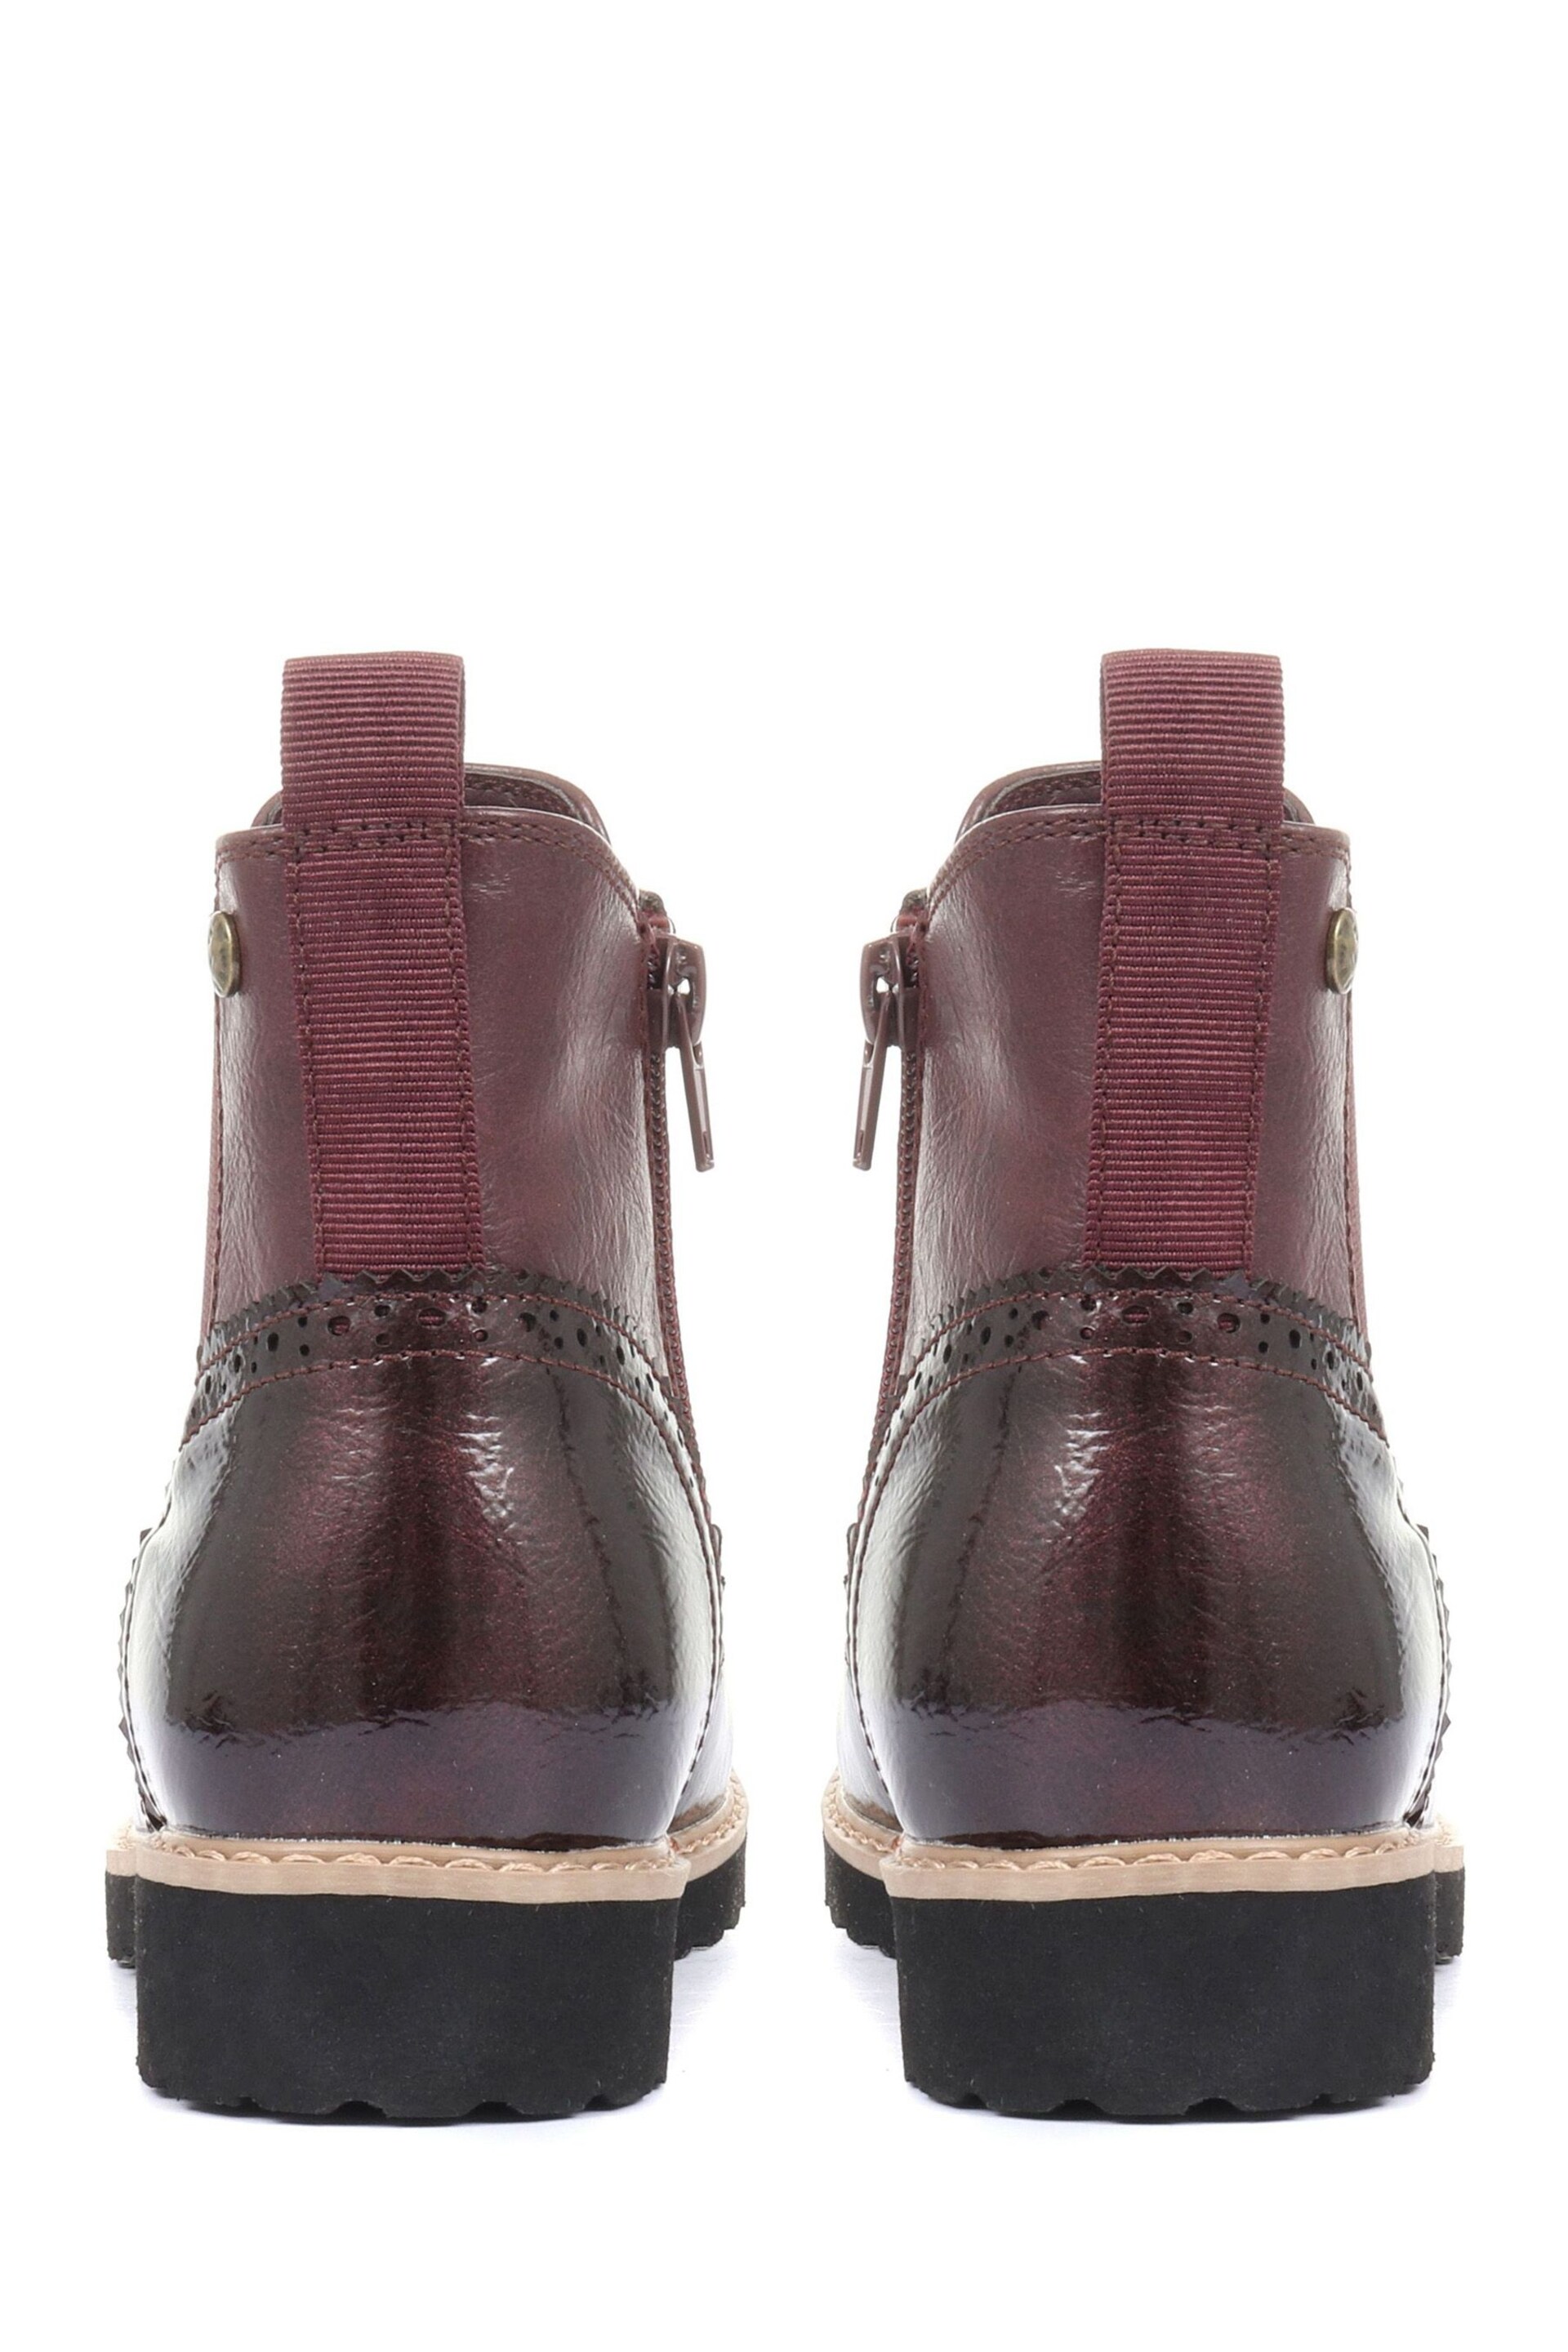 Pavers Ladies Brogue Chelsea Boots - Image 2 of 5